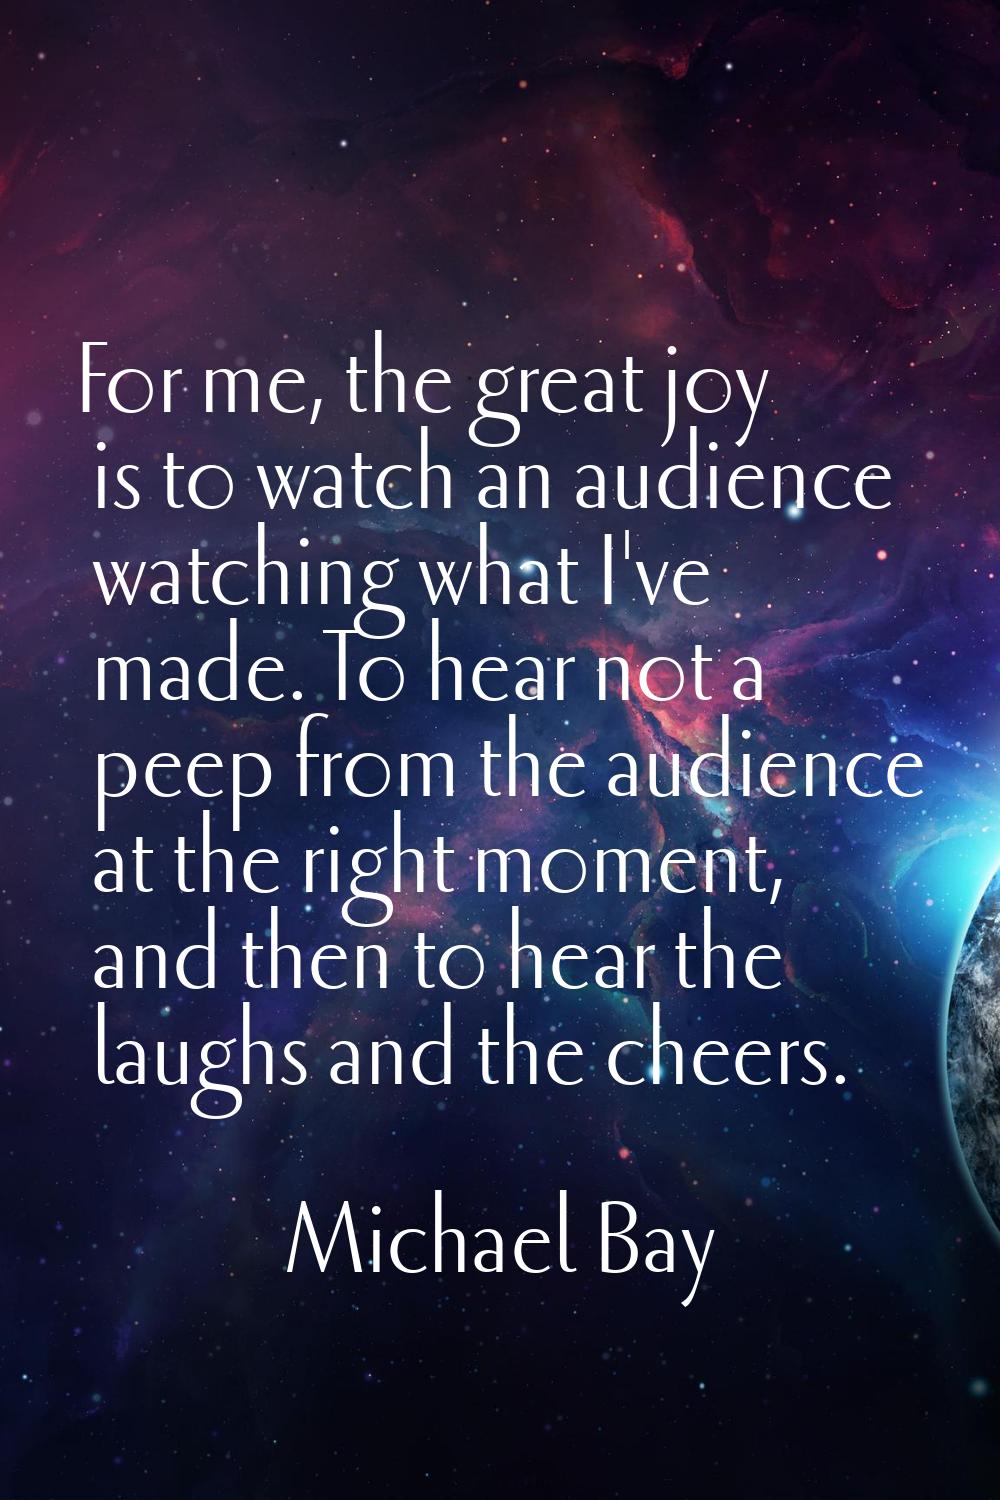 For me, the great joy is to watch an audience watching what I've made. To hear not a peep from the 